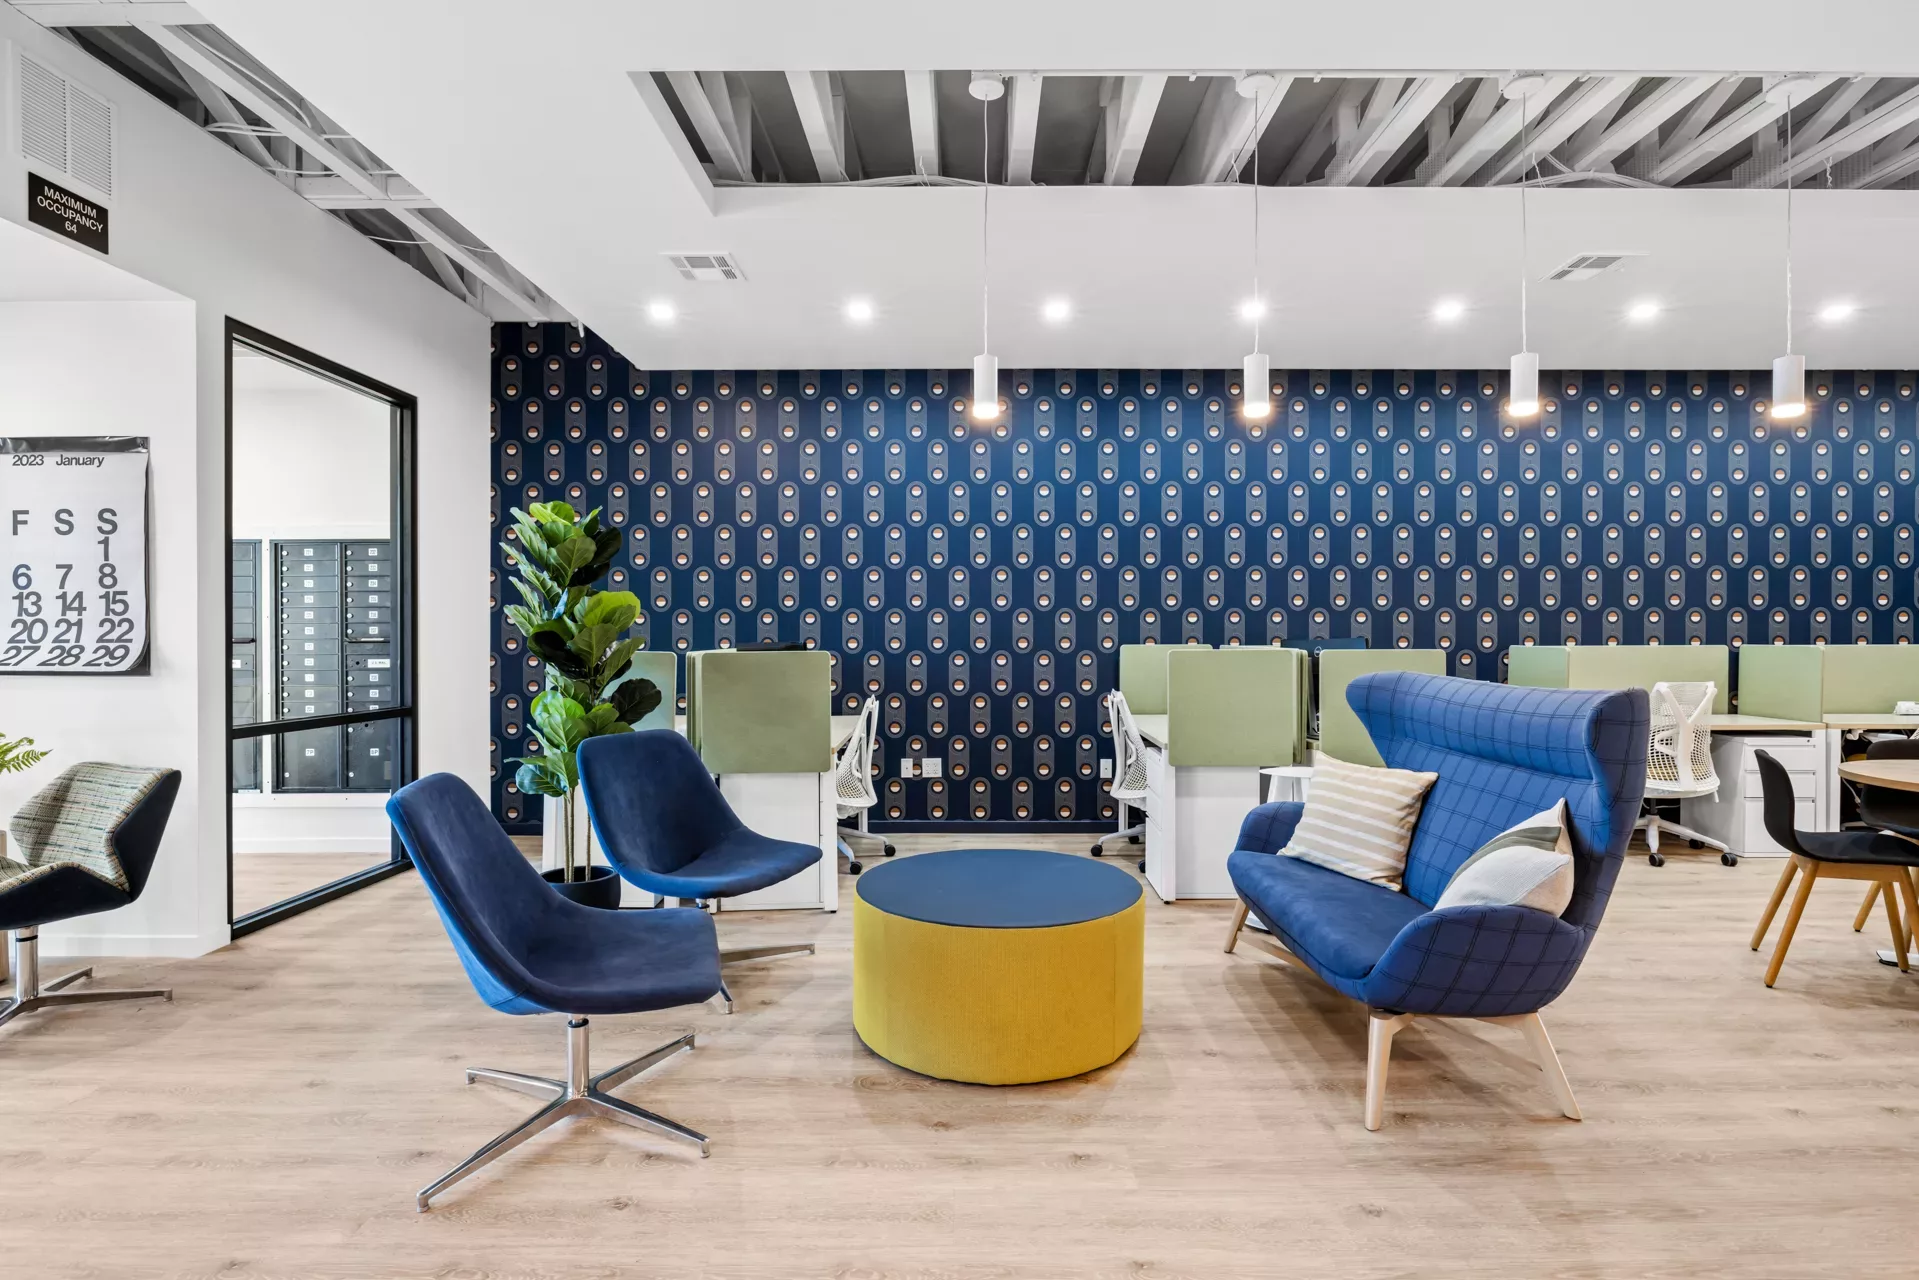 Large coworking area with blue seats and planters in a bright, well lit office space